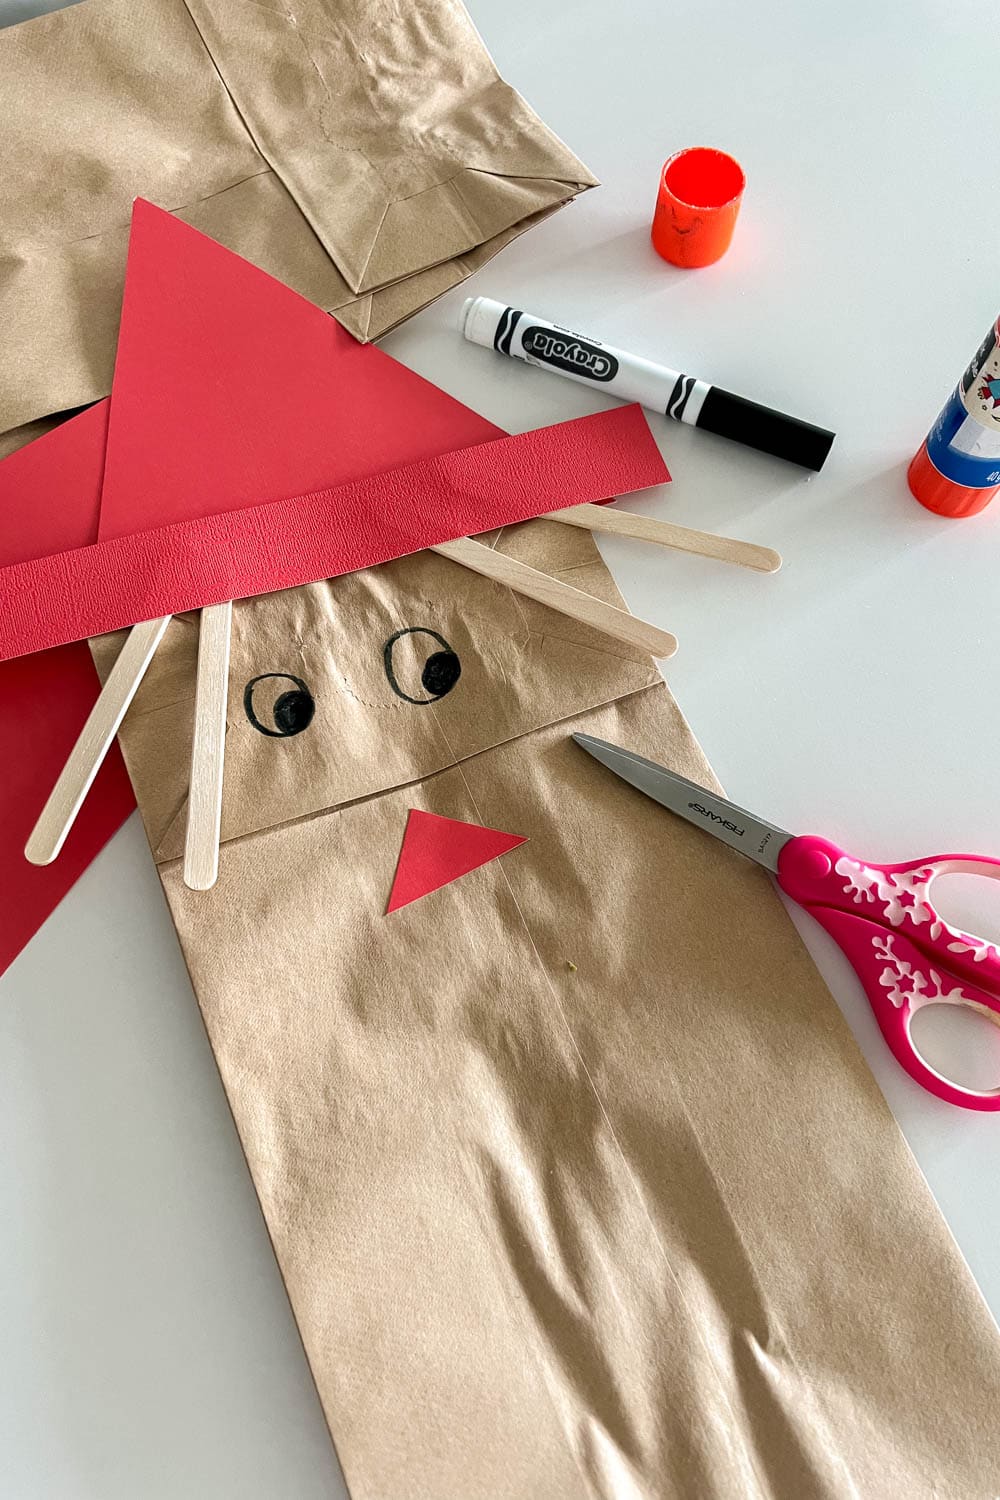 Adding a cardstock nose on our paper bag DIY to make it look like a scare crow